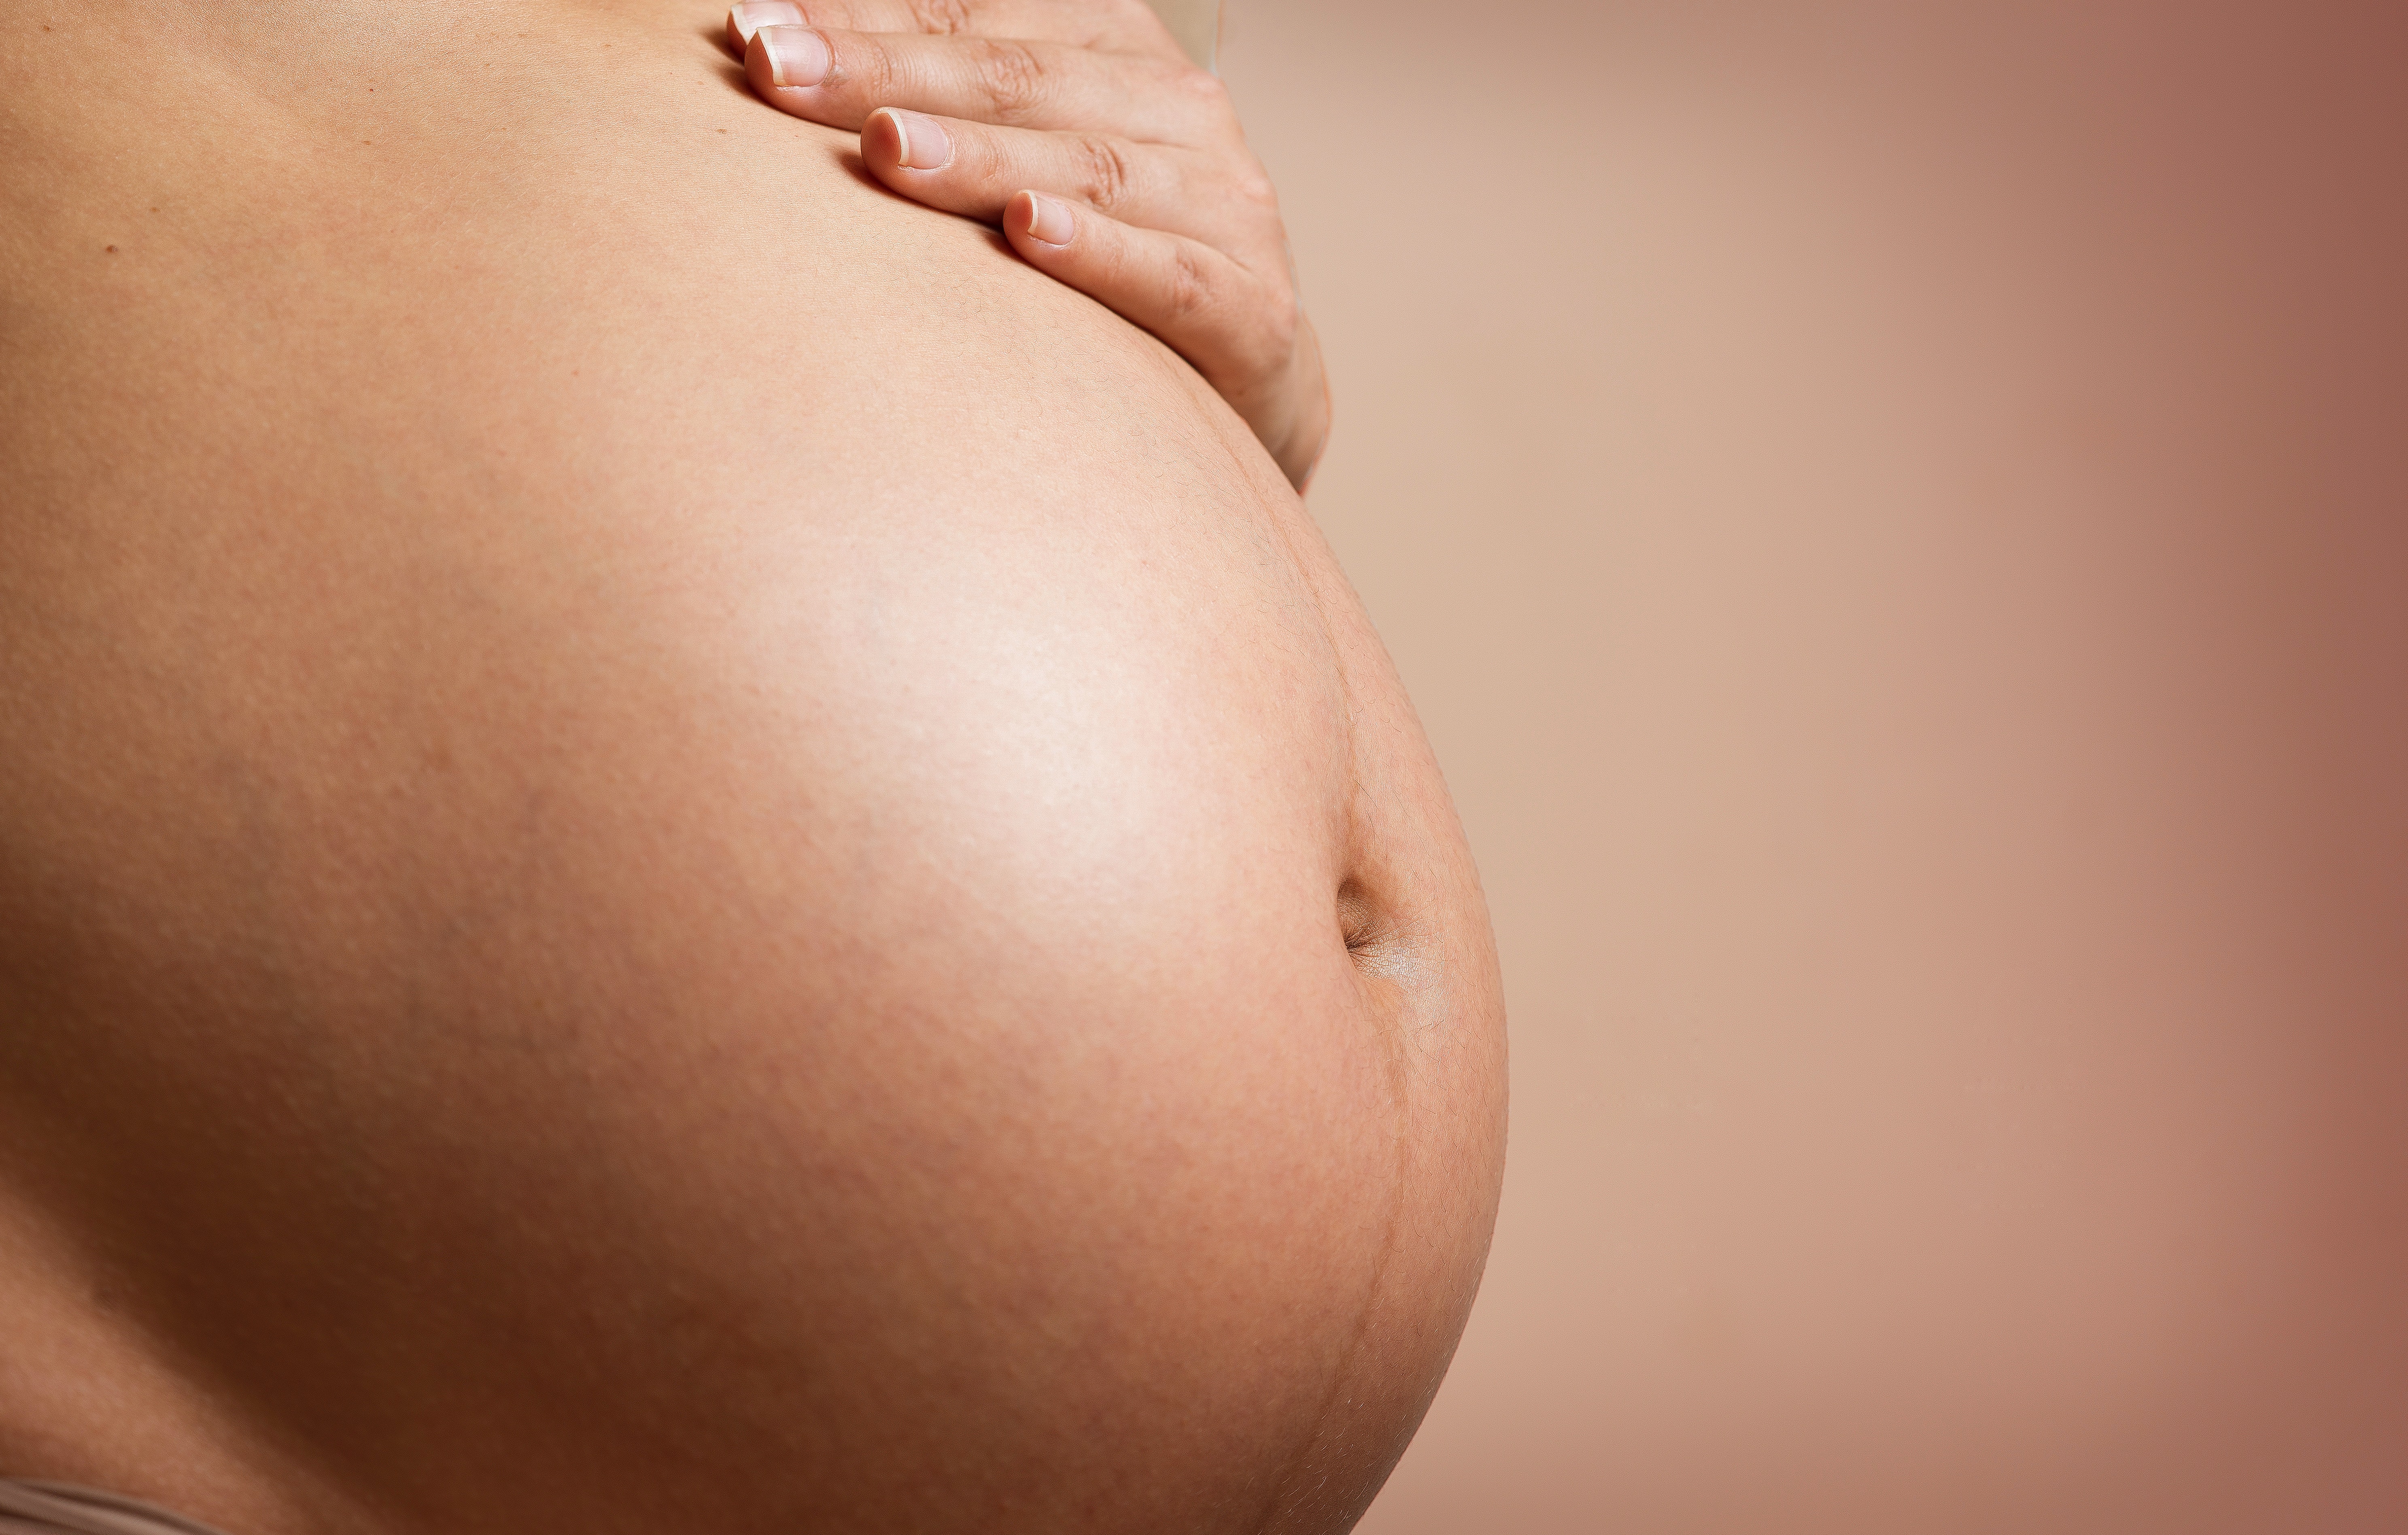 An Expecting mother’s guide on childbirth